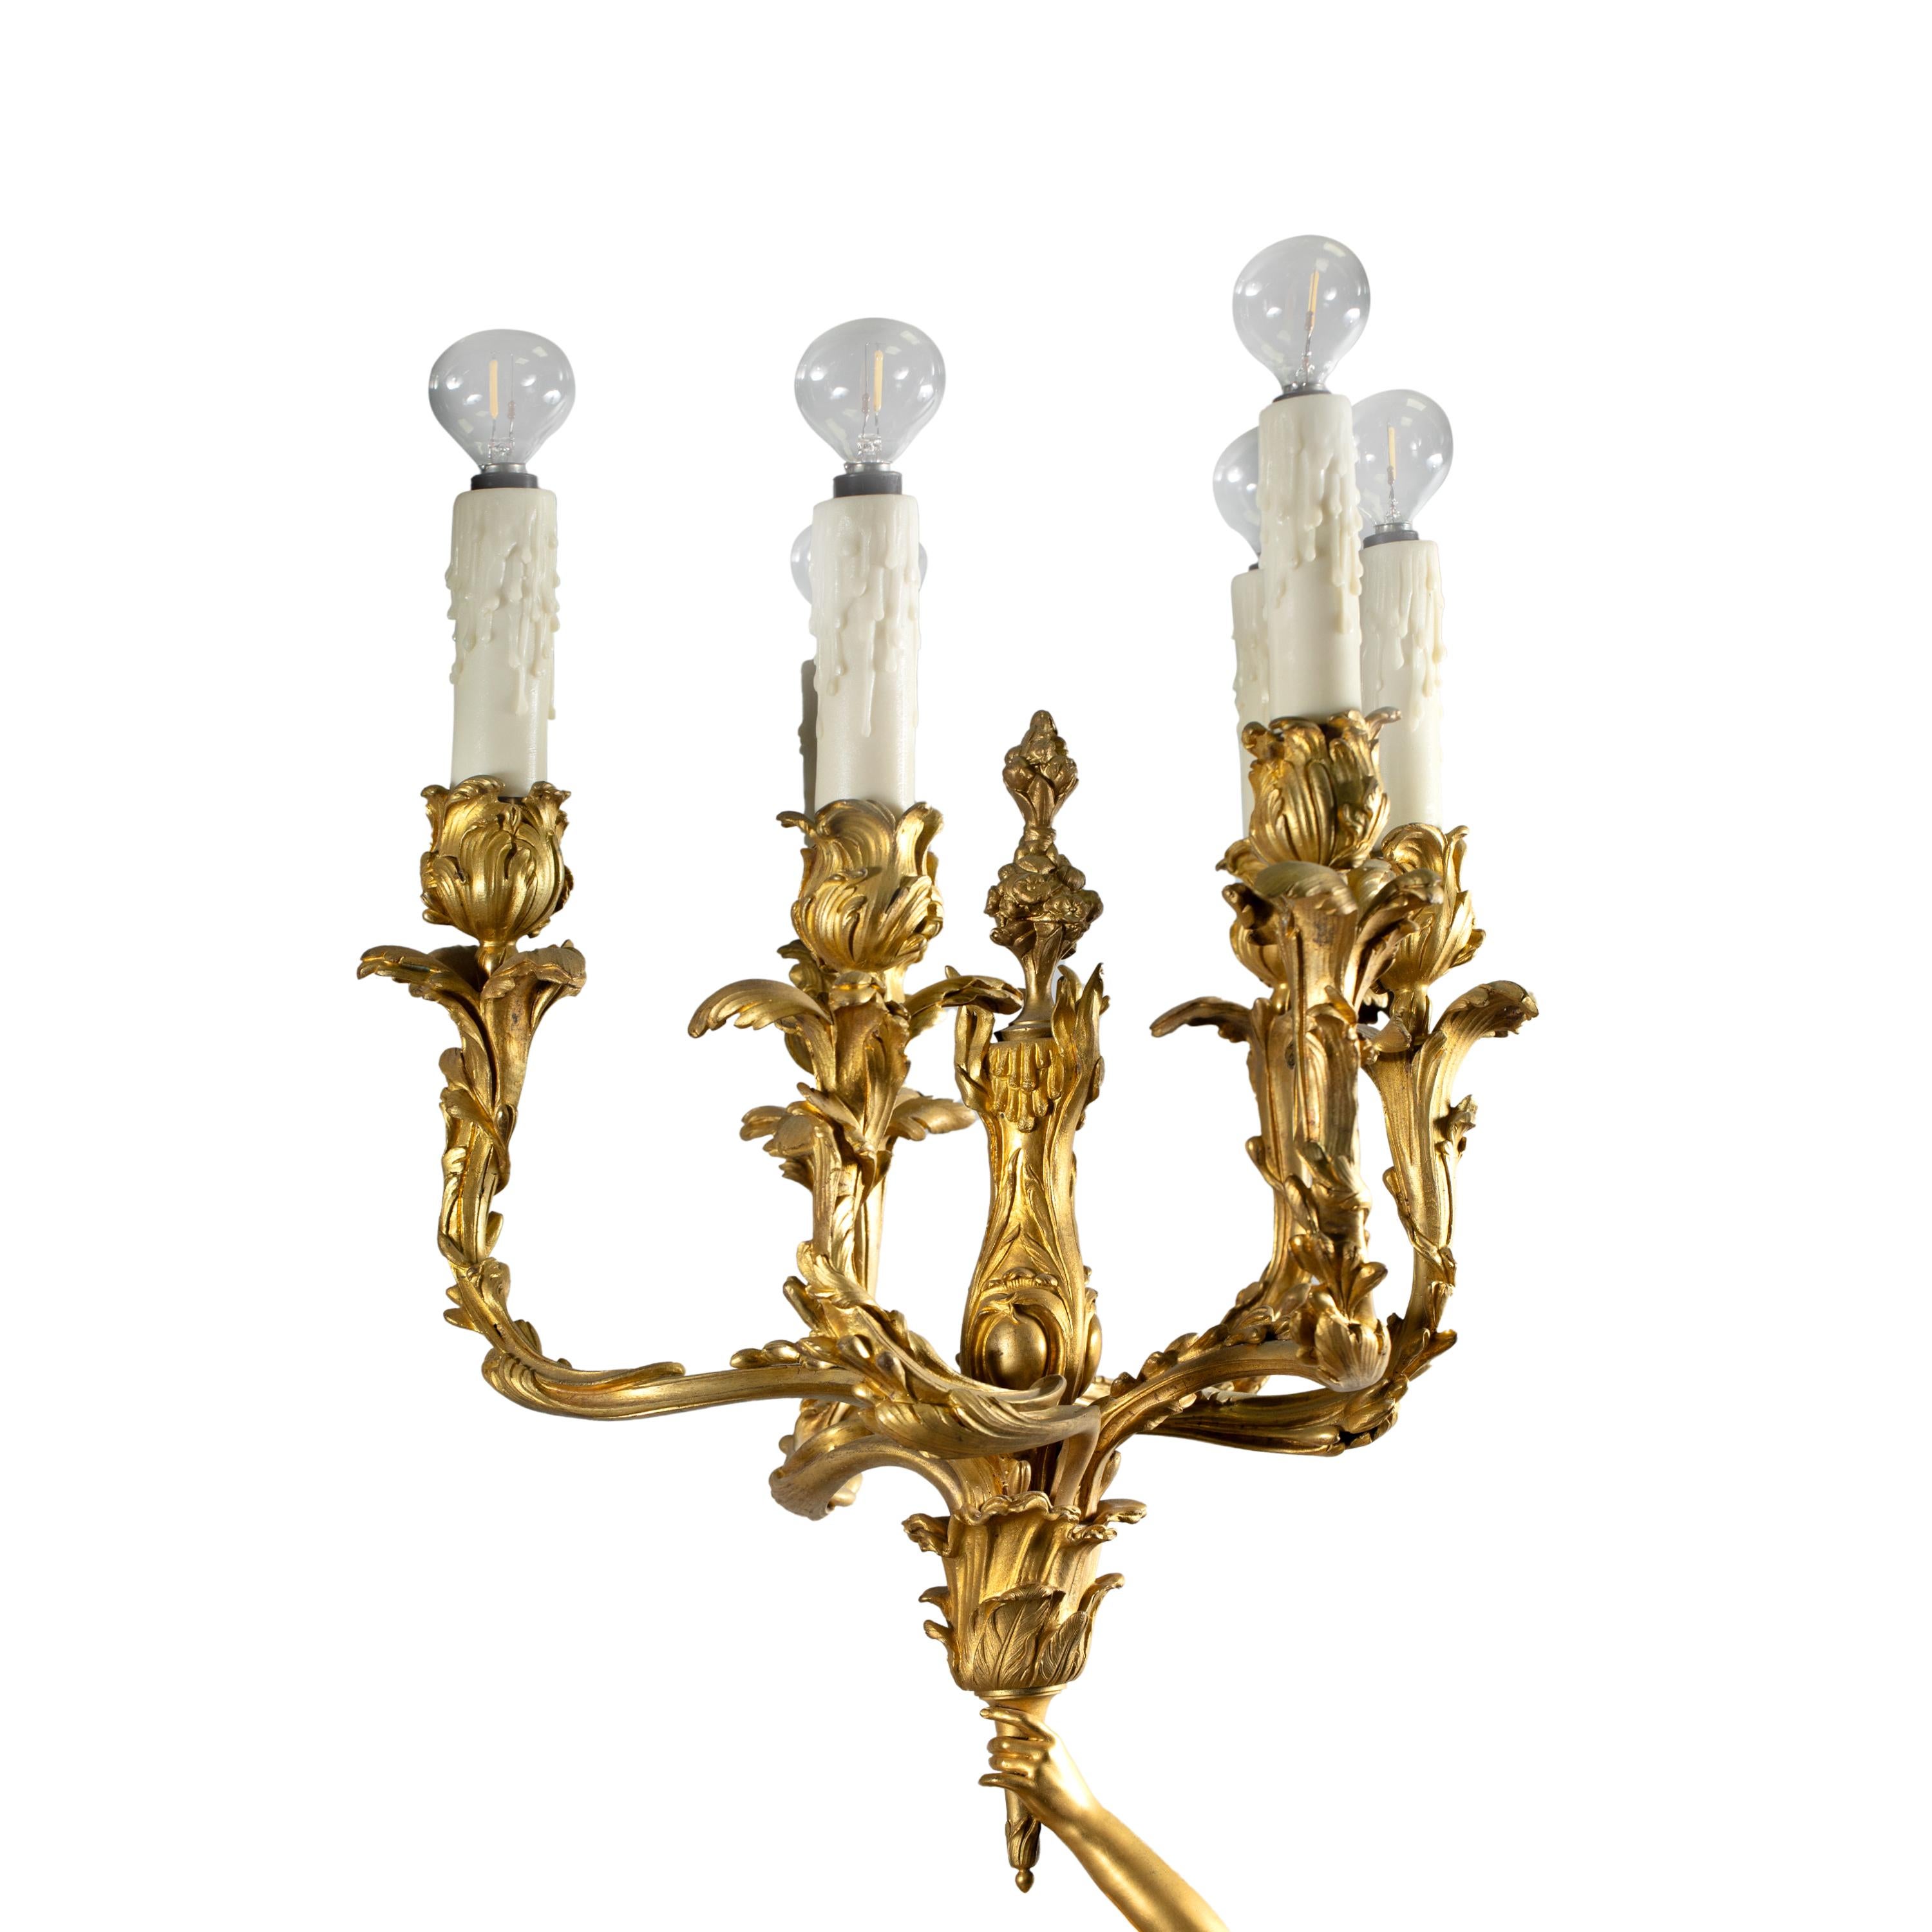 A Large French Gilt-Bronze Centerpiece Candelabra After Clodion, 19th Century For Sale 2